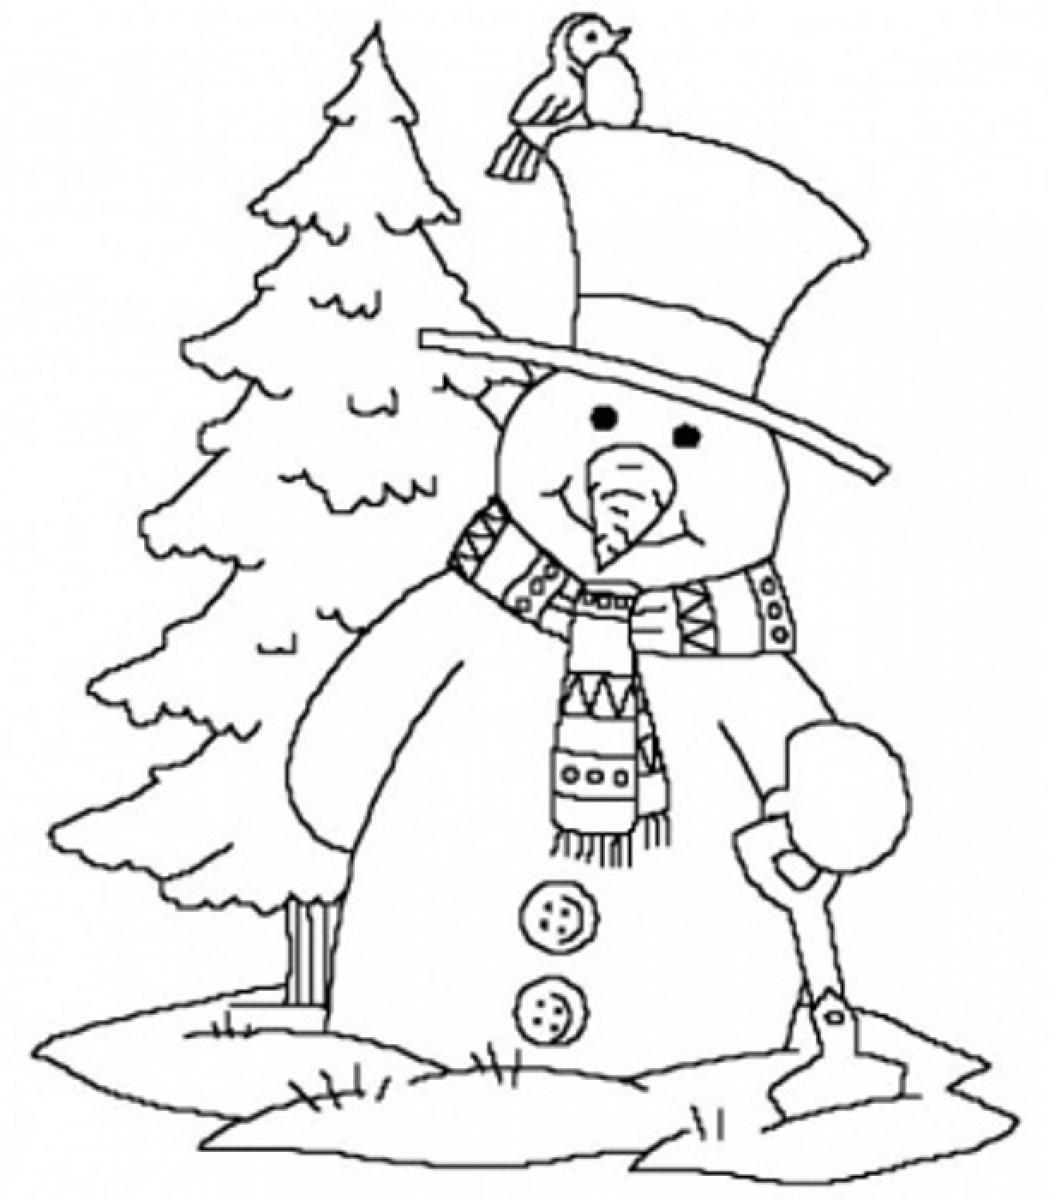 Printable Winter Coloring Pages | ColoringMe.com